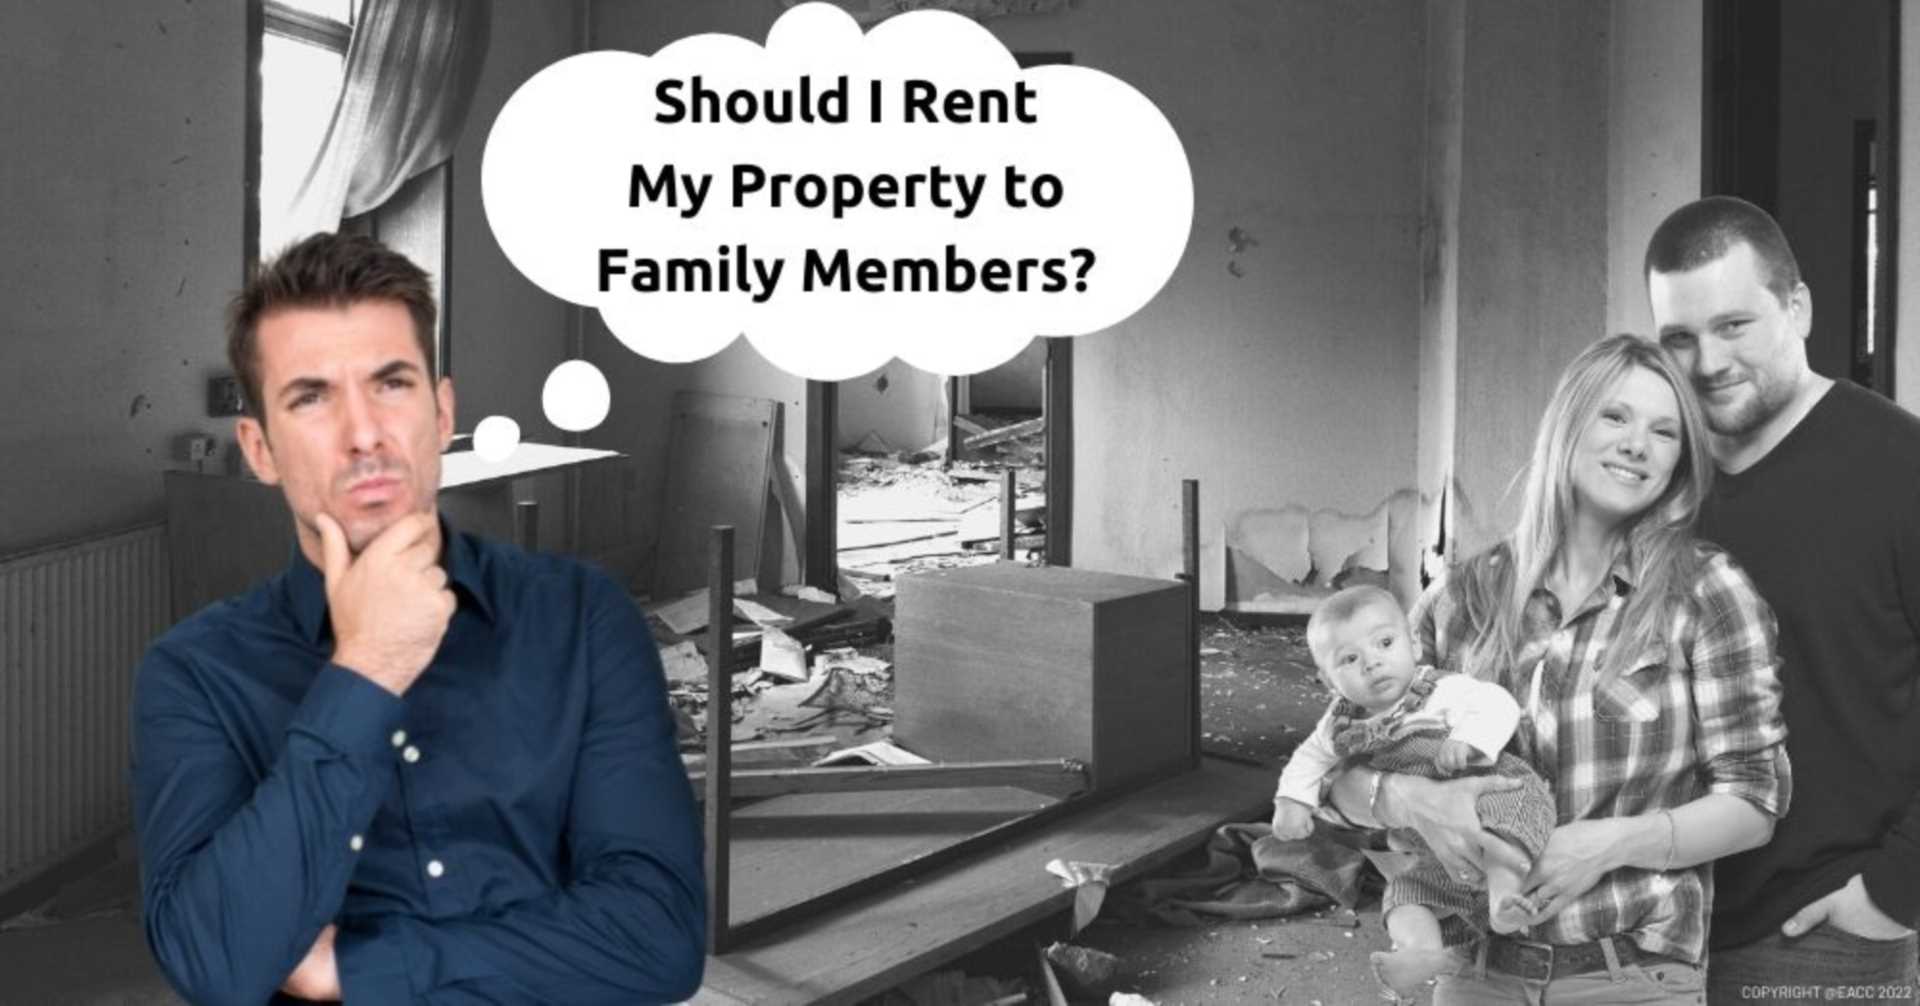 Why Renting Your Property to Family Could Be Problematic